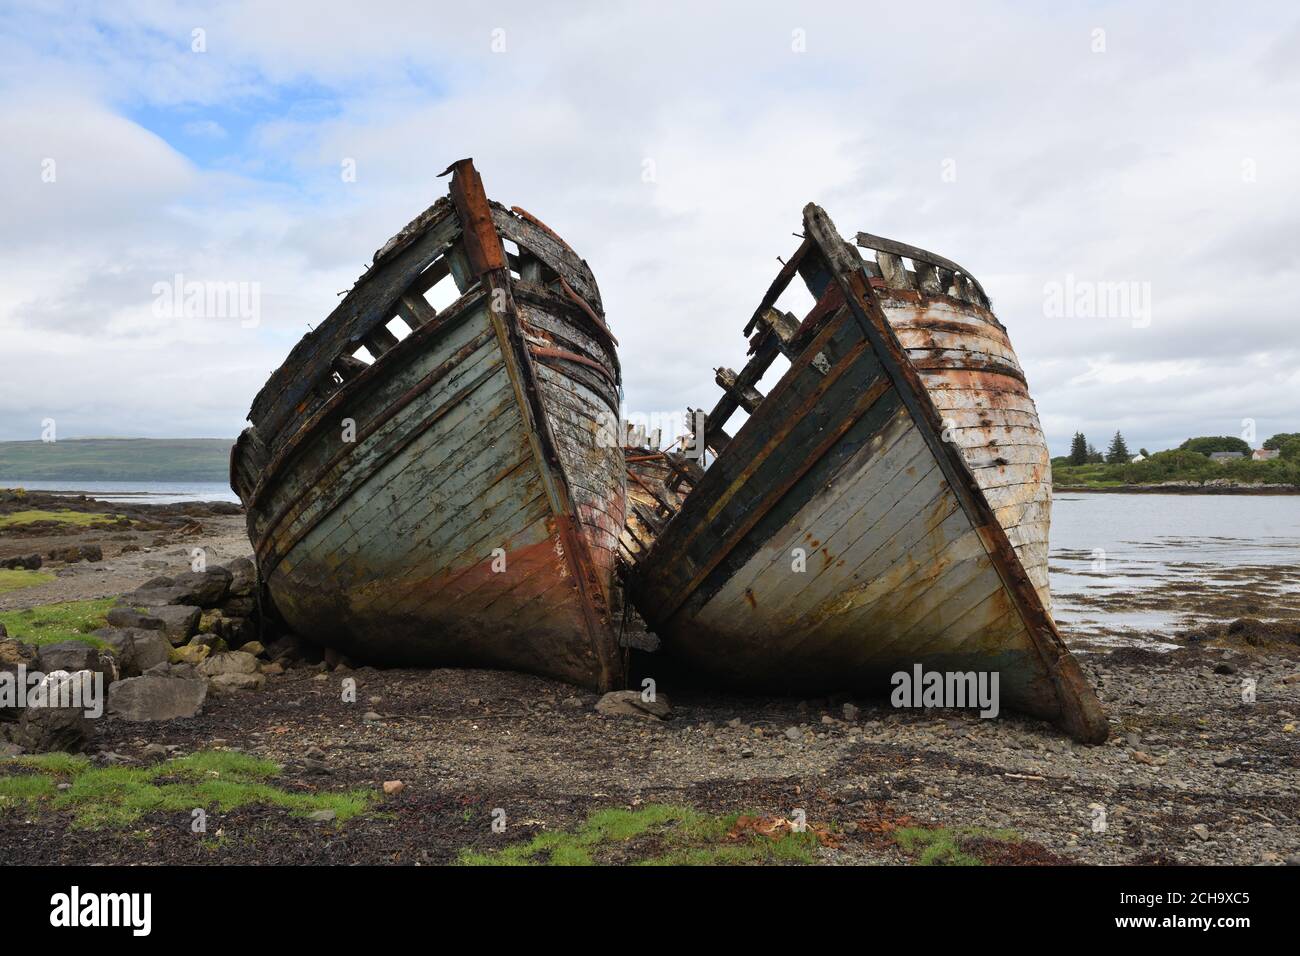 Two abandoned fishing boats lie beached at Salen on the Isle of Mull, Scotland, UK, Europe Stock Photo